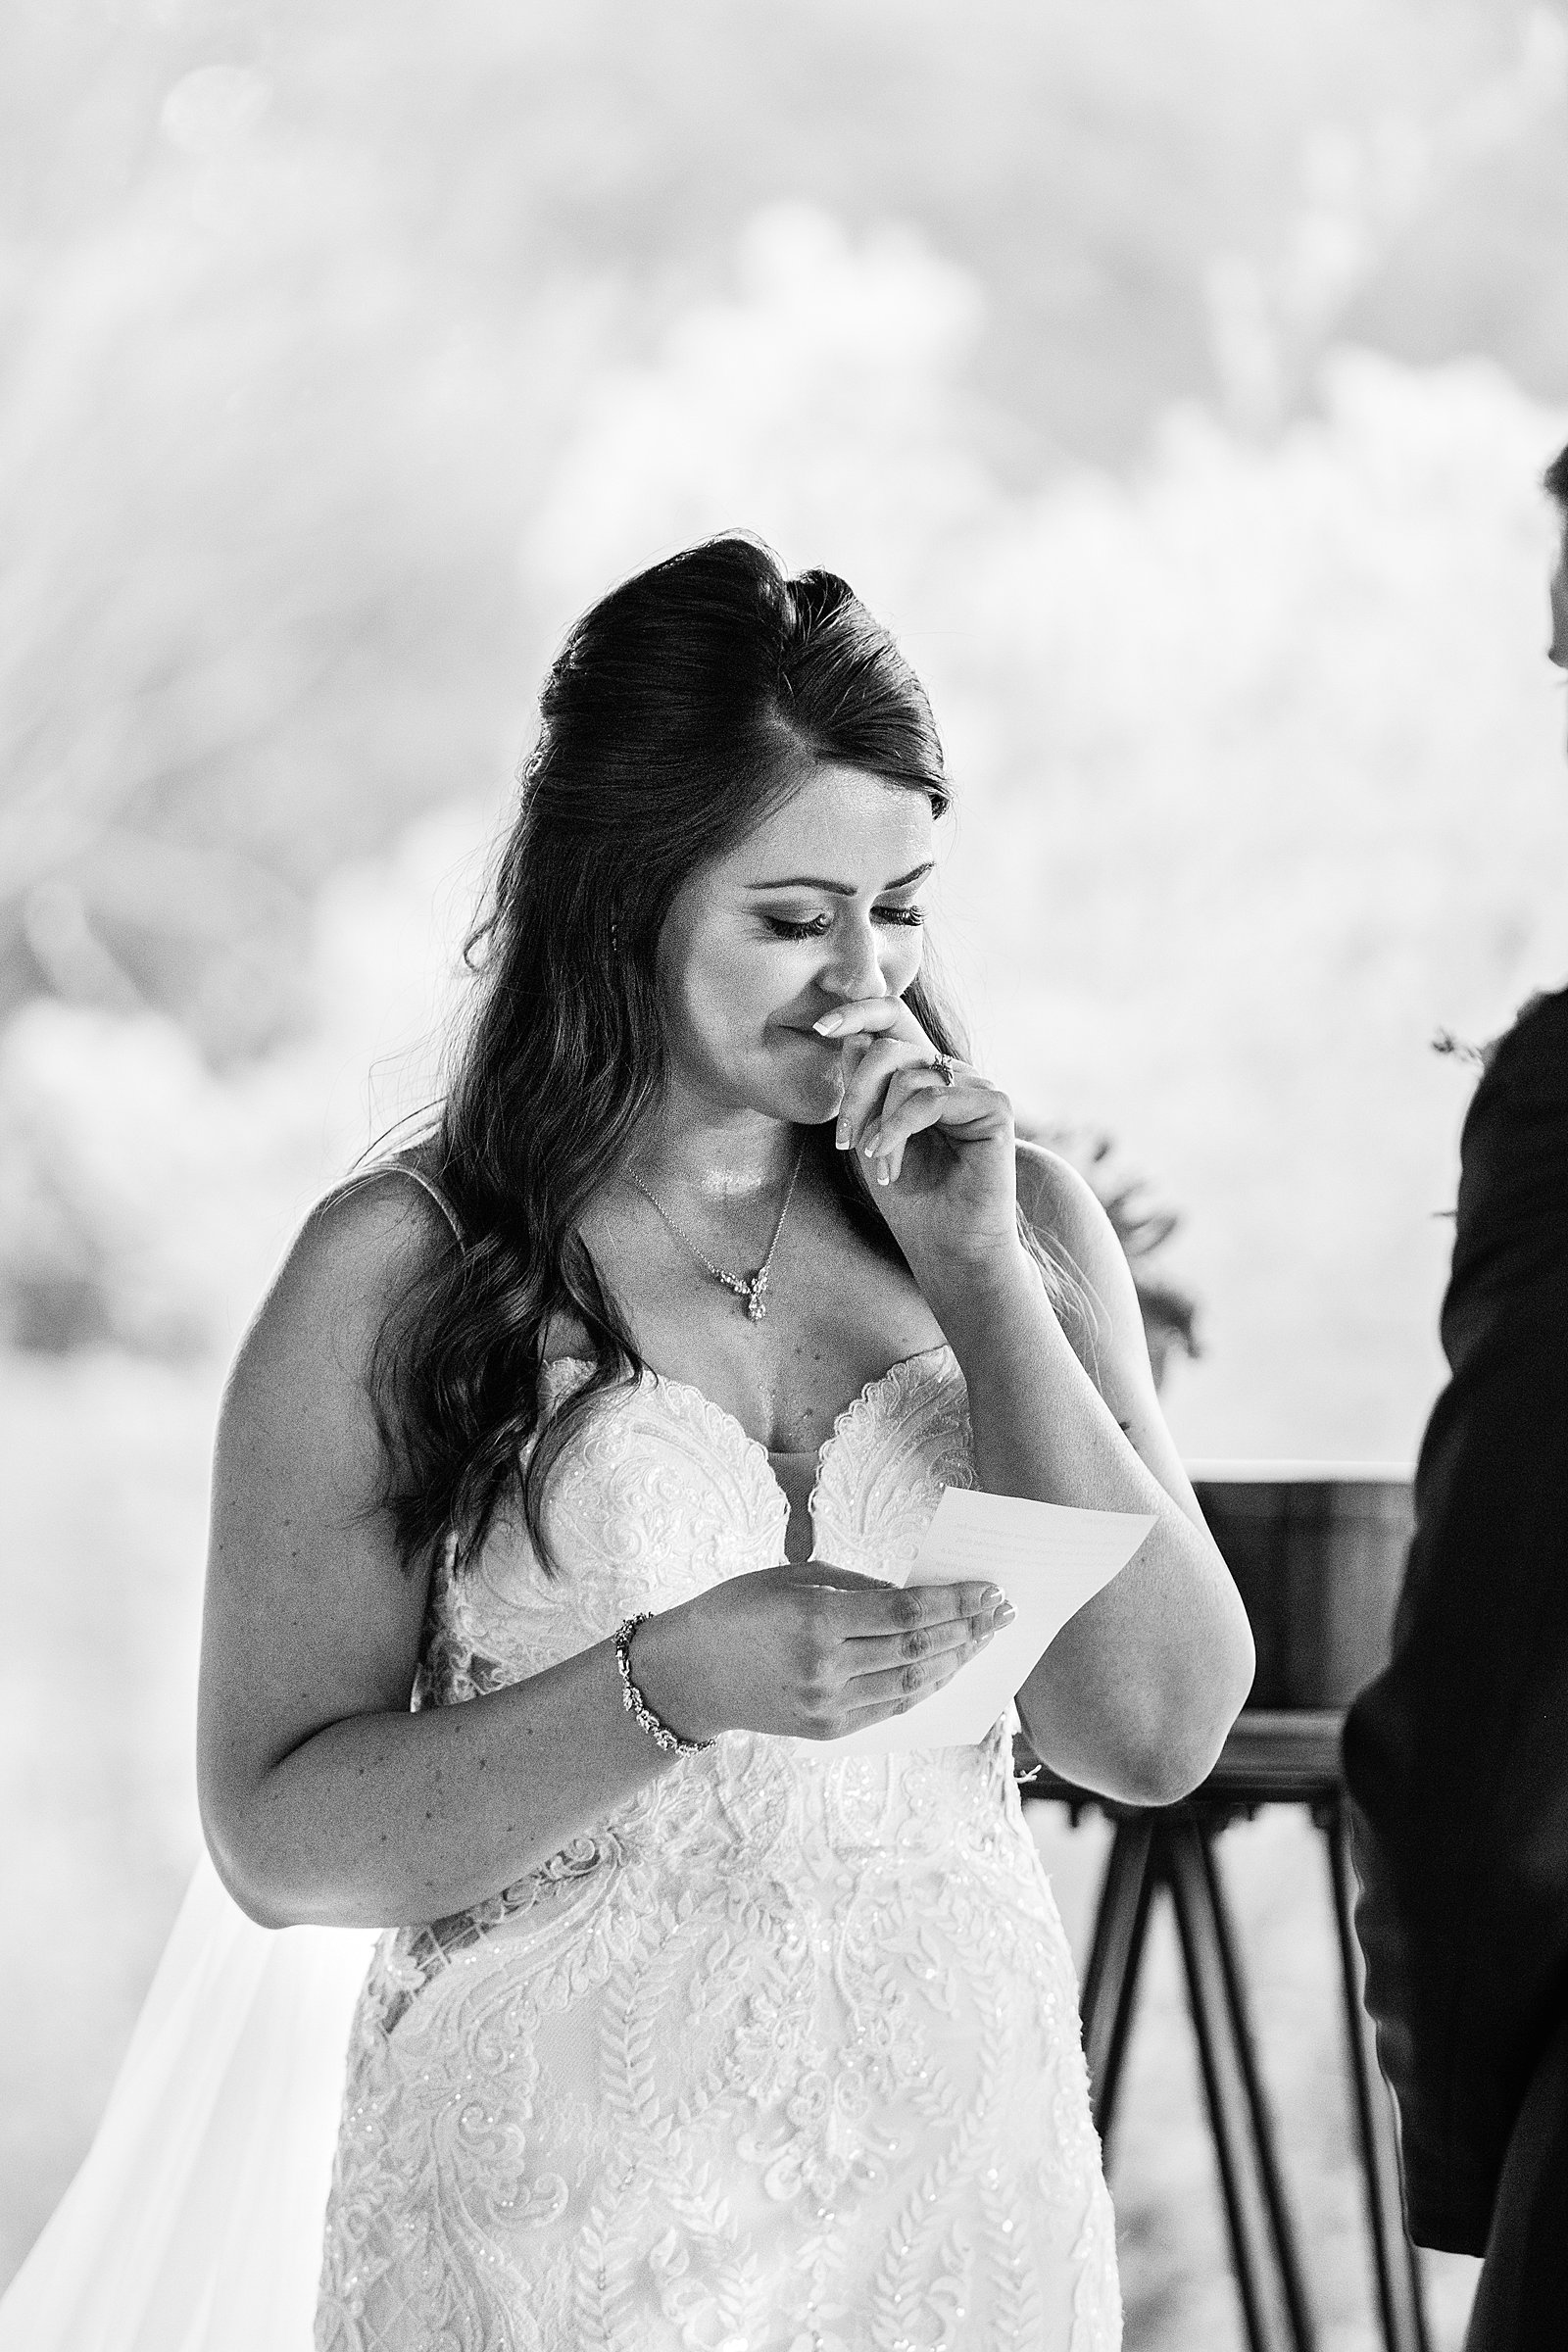 Bride getting emotion reading her vows during her wedding ceremony at Desert Botanical Gardens by Phoenix wedding photographer PMA Photography.